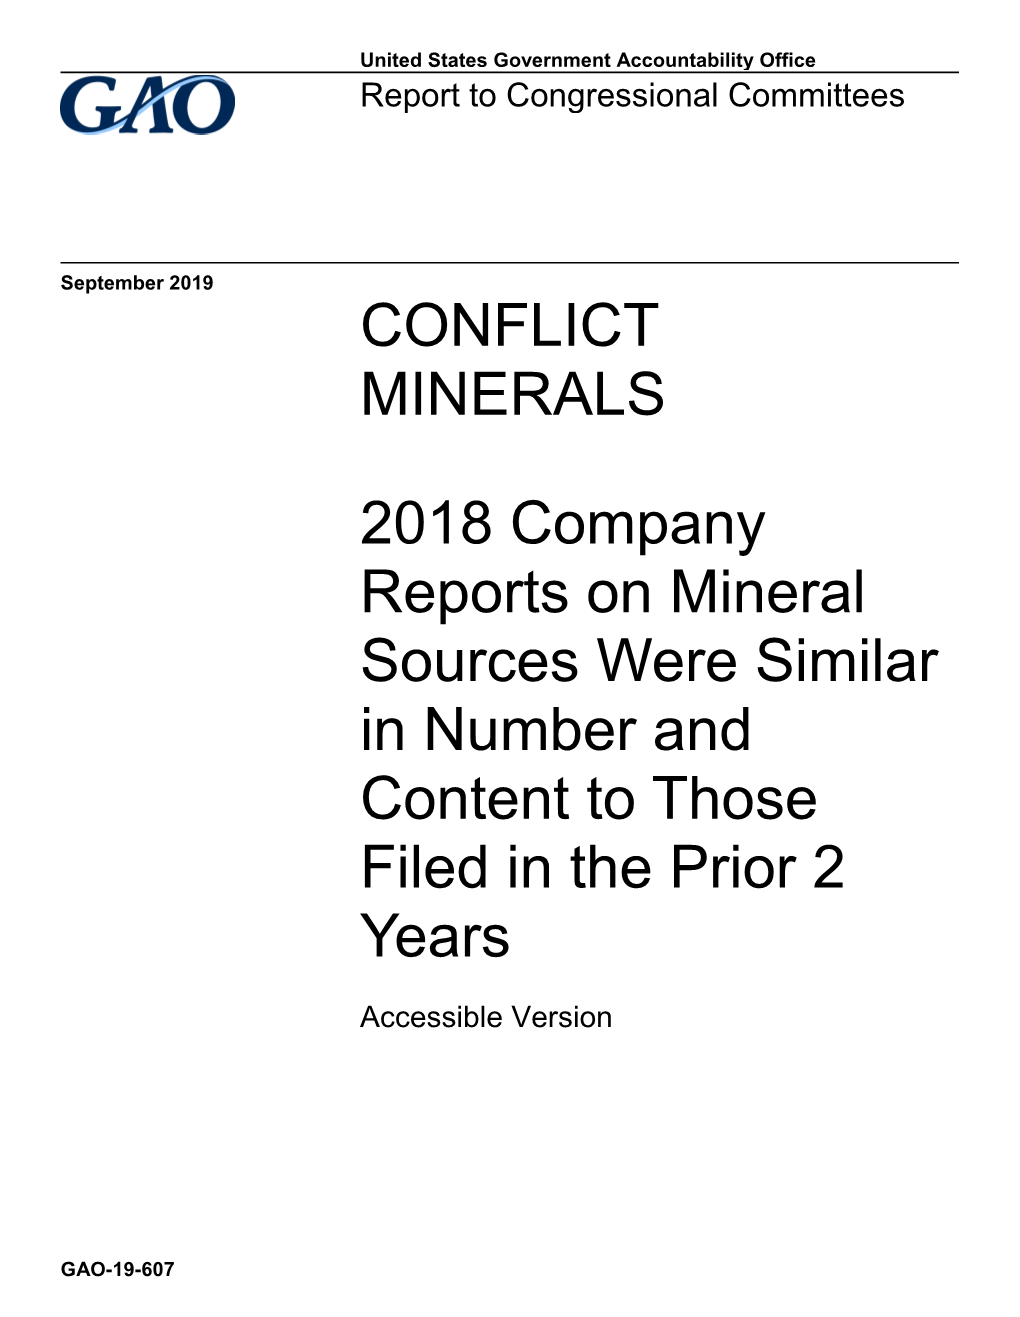 2018 Company Reports on Mineral Sources Were Similar in Number and Content to Those Filed in the Prior 2 Years